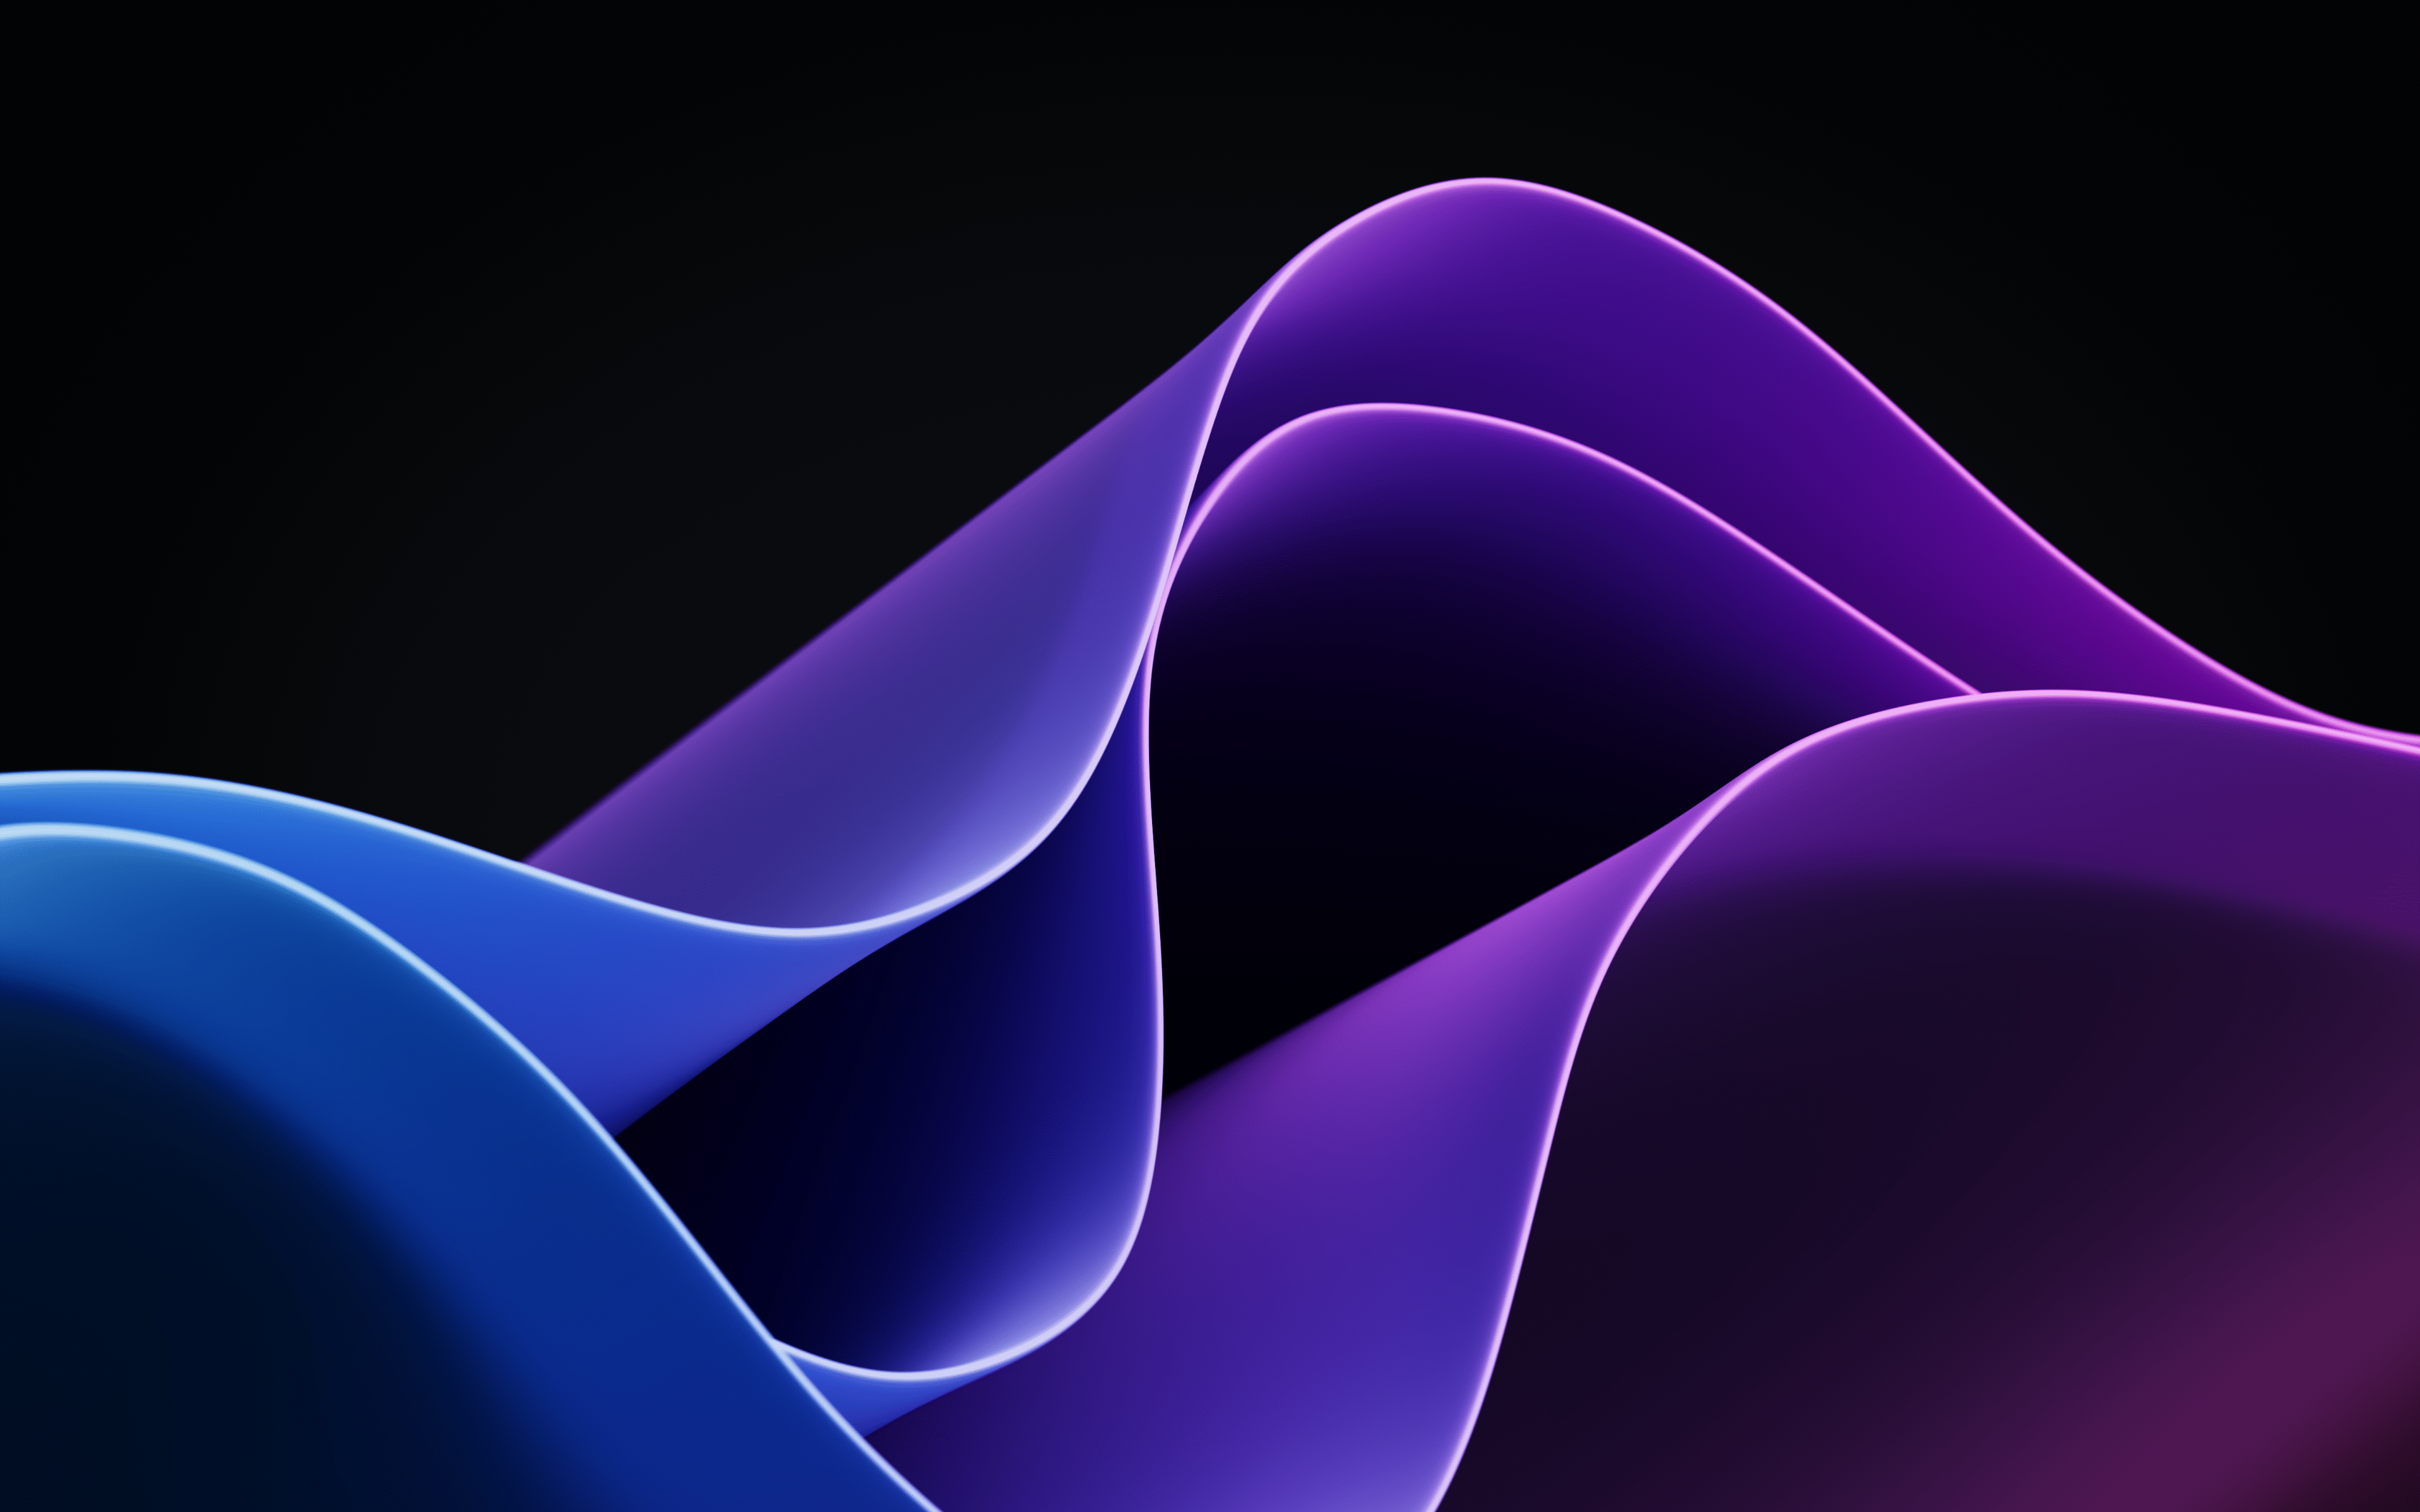 A wave of blue and purple light against a black background - Windows 10